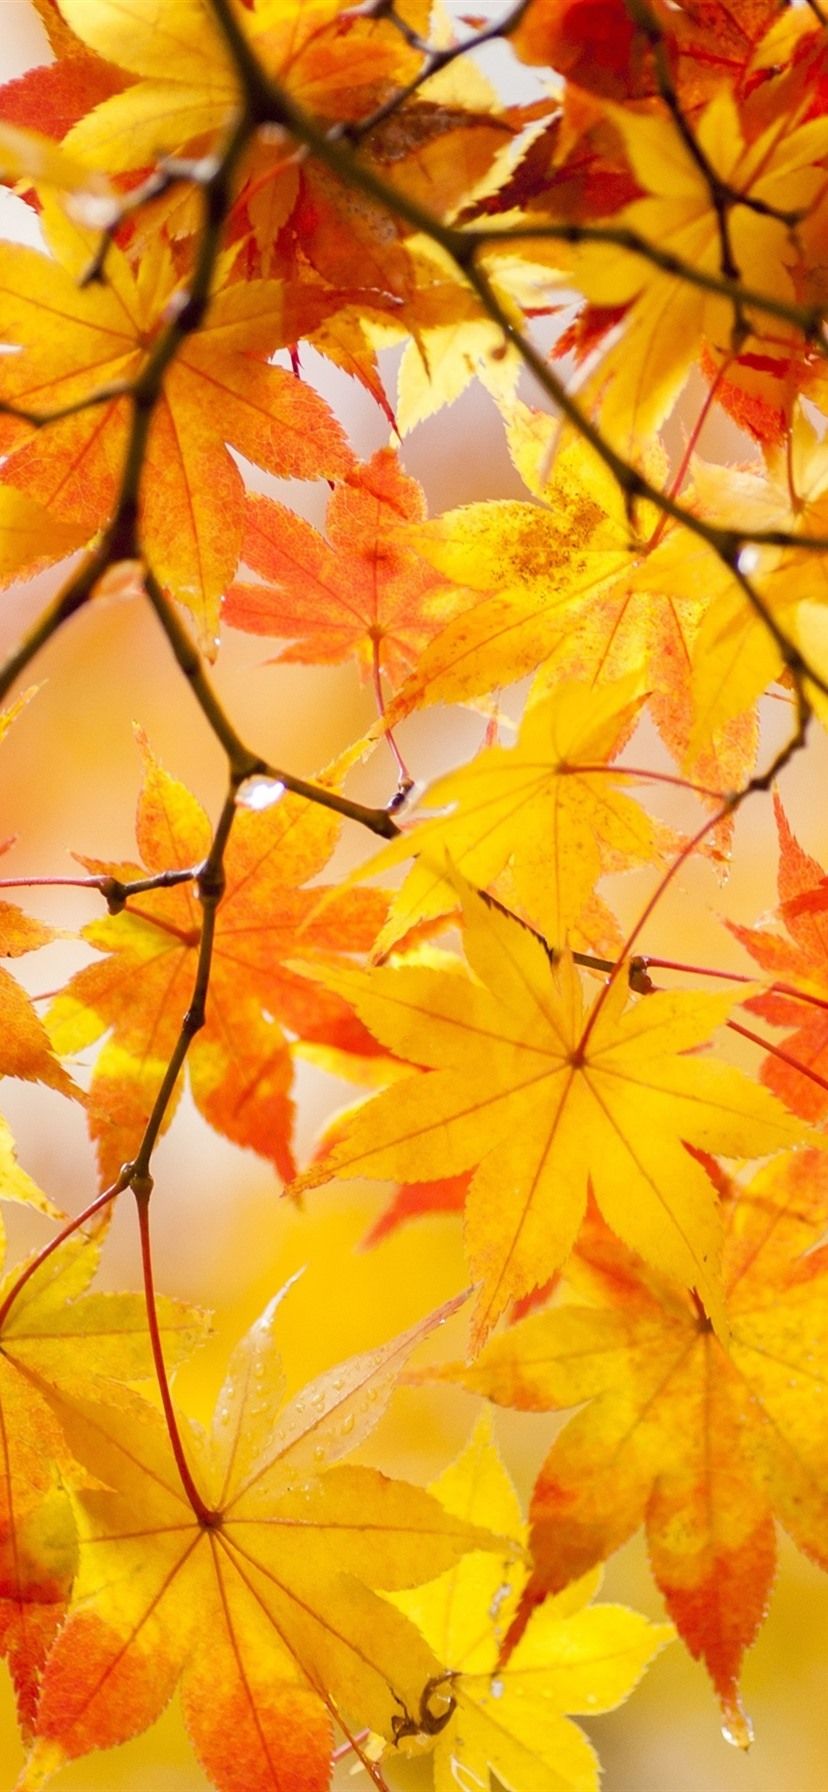 Yellow Maple Leaves, Tree, Beautiful Autumn 1080x1920 IPhone 8 7 6 6S Plus Wallpaper, Background, Picture, Image